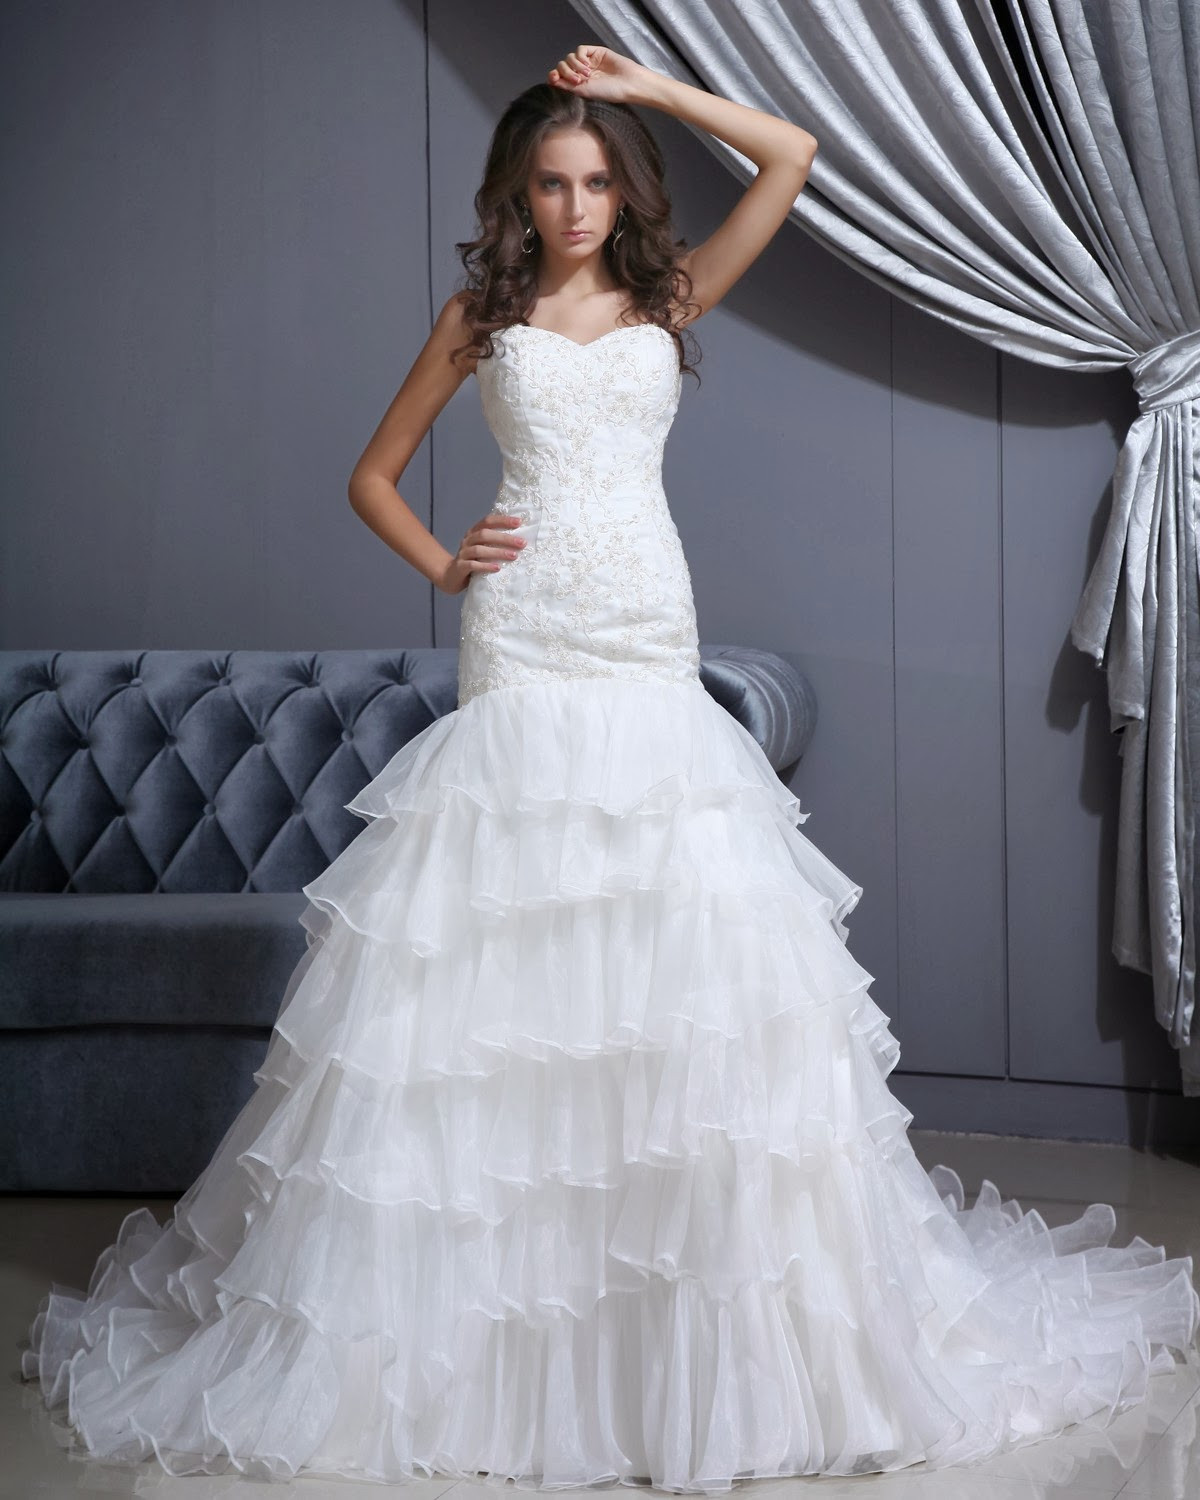 Wholesale Wedding Gowns
 Wedding Dress Finding Discount Wedding Gowns line